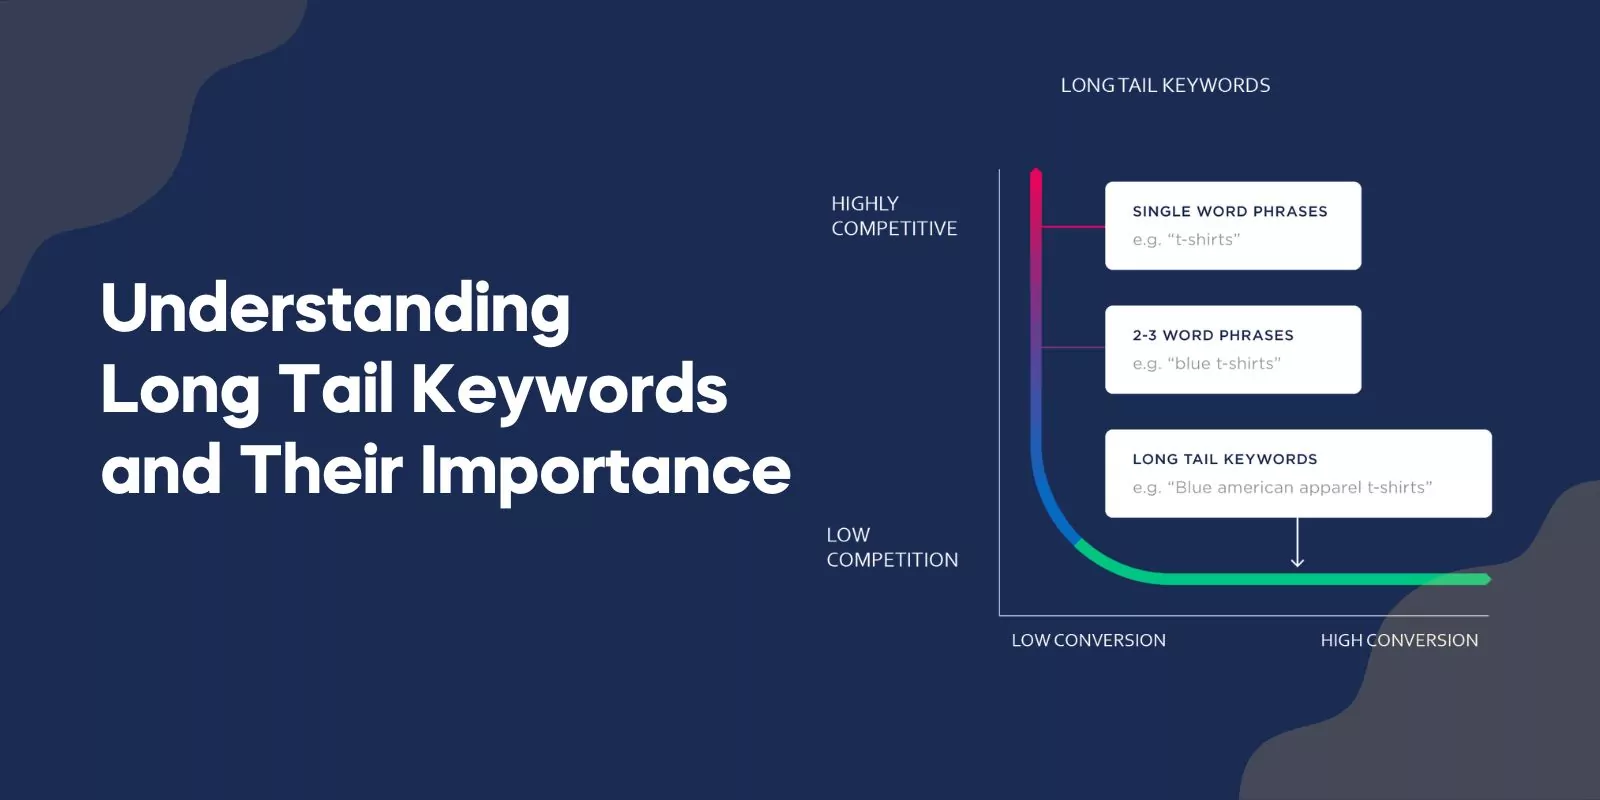 Understanding Long Tail Keywords and Their Importance